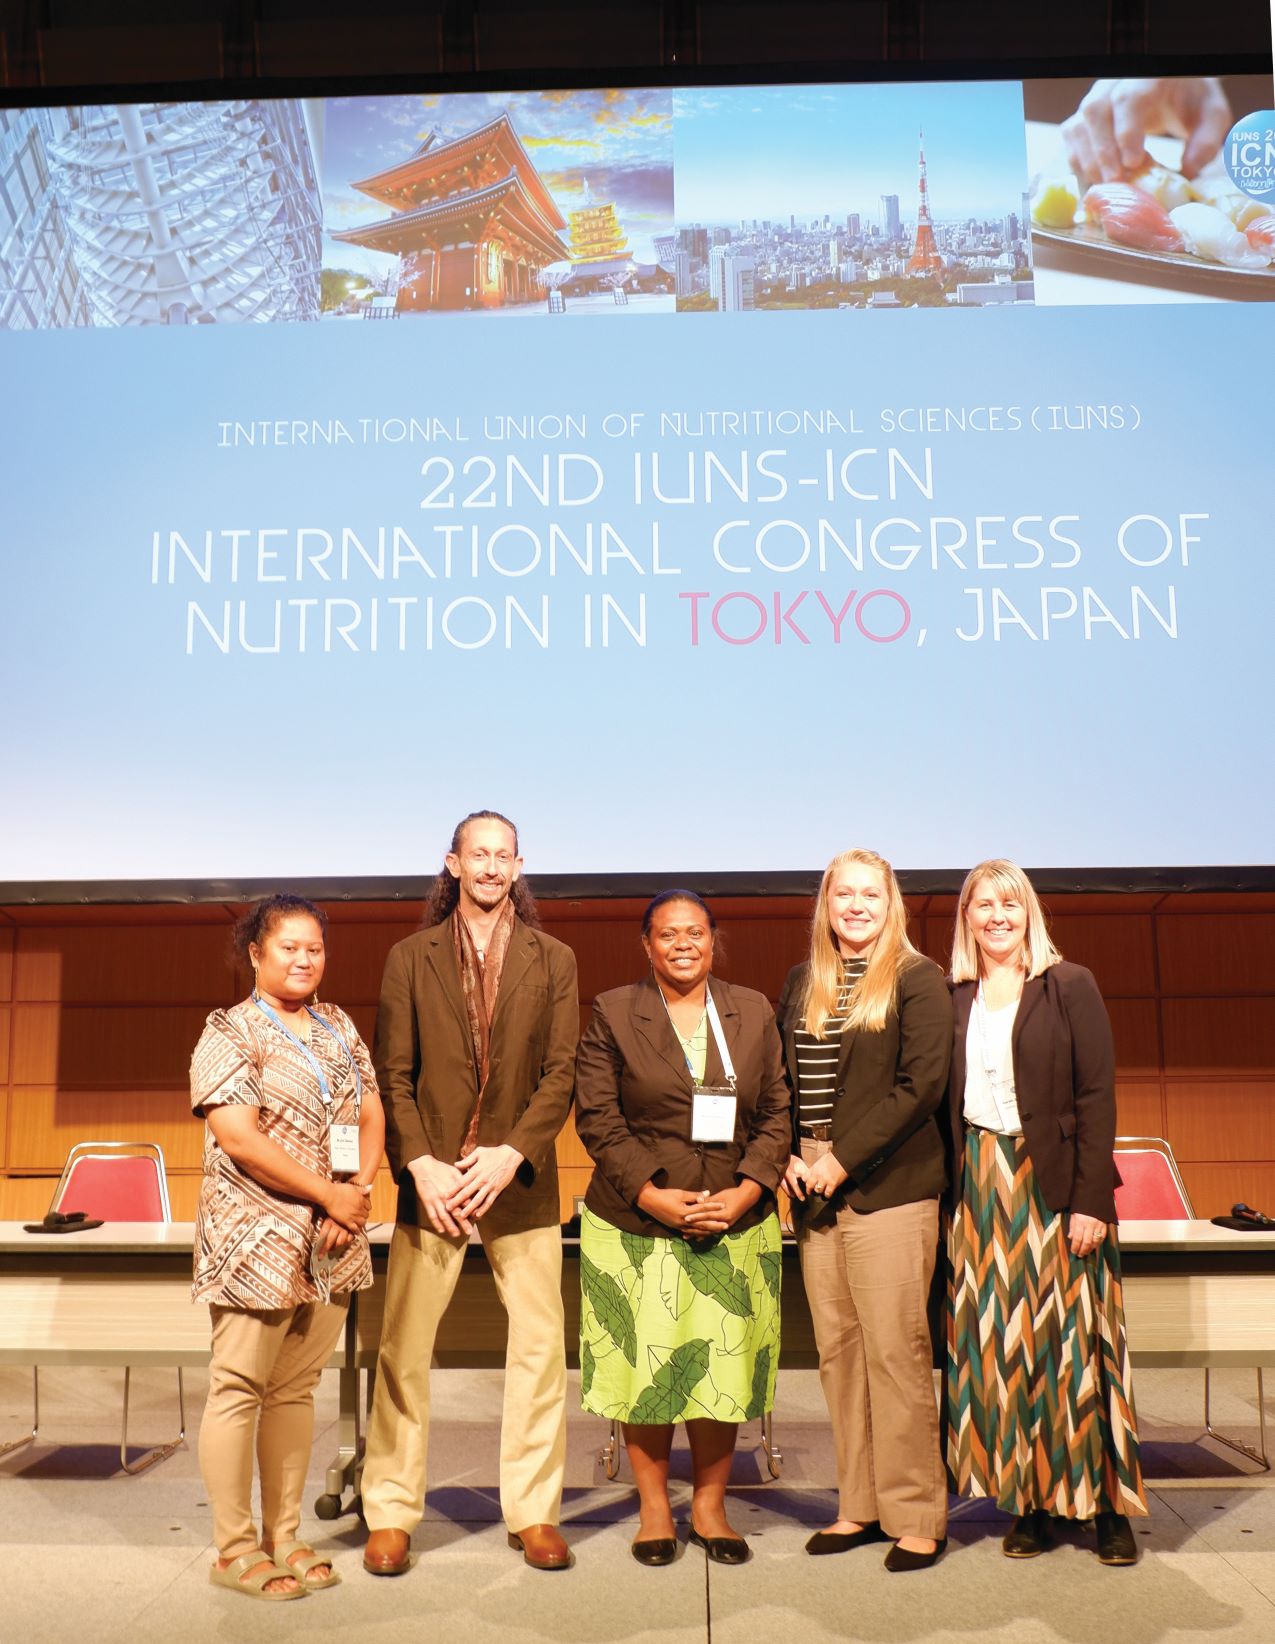 A group of people Speaking at the International Congress of Nutrition about the school meals programs in the Pacific